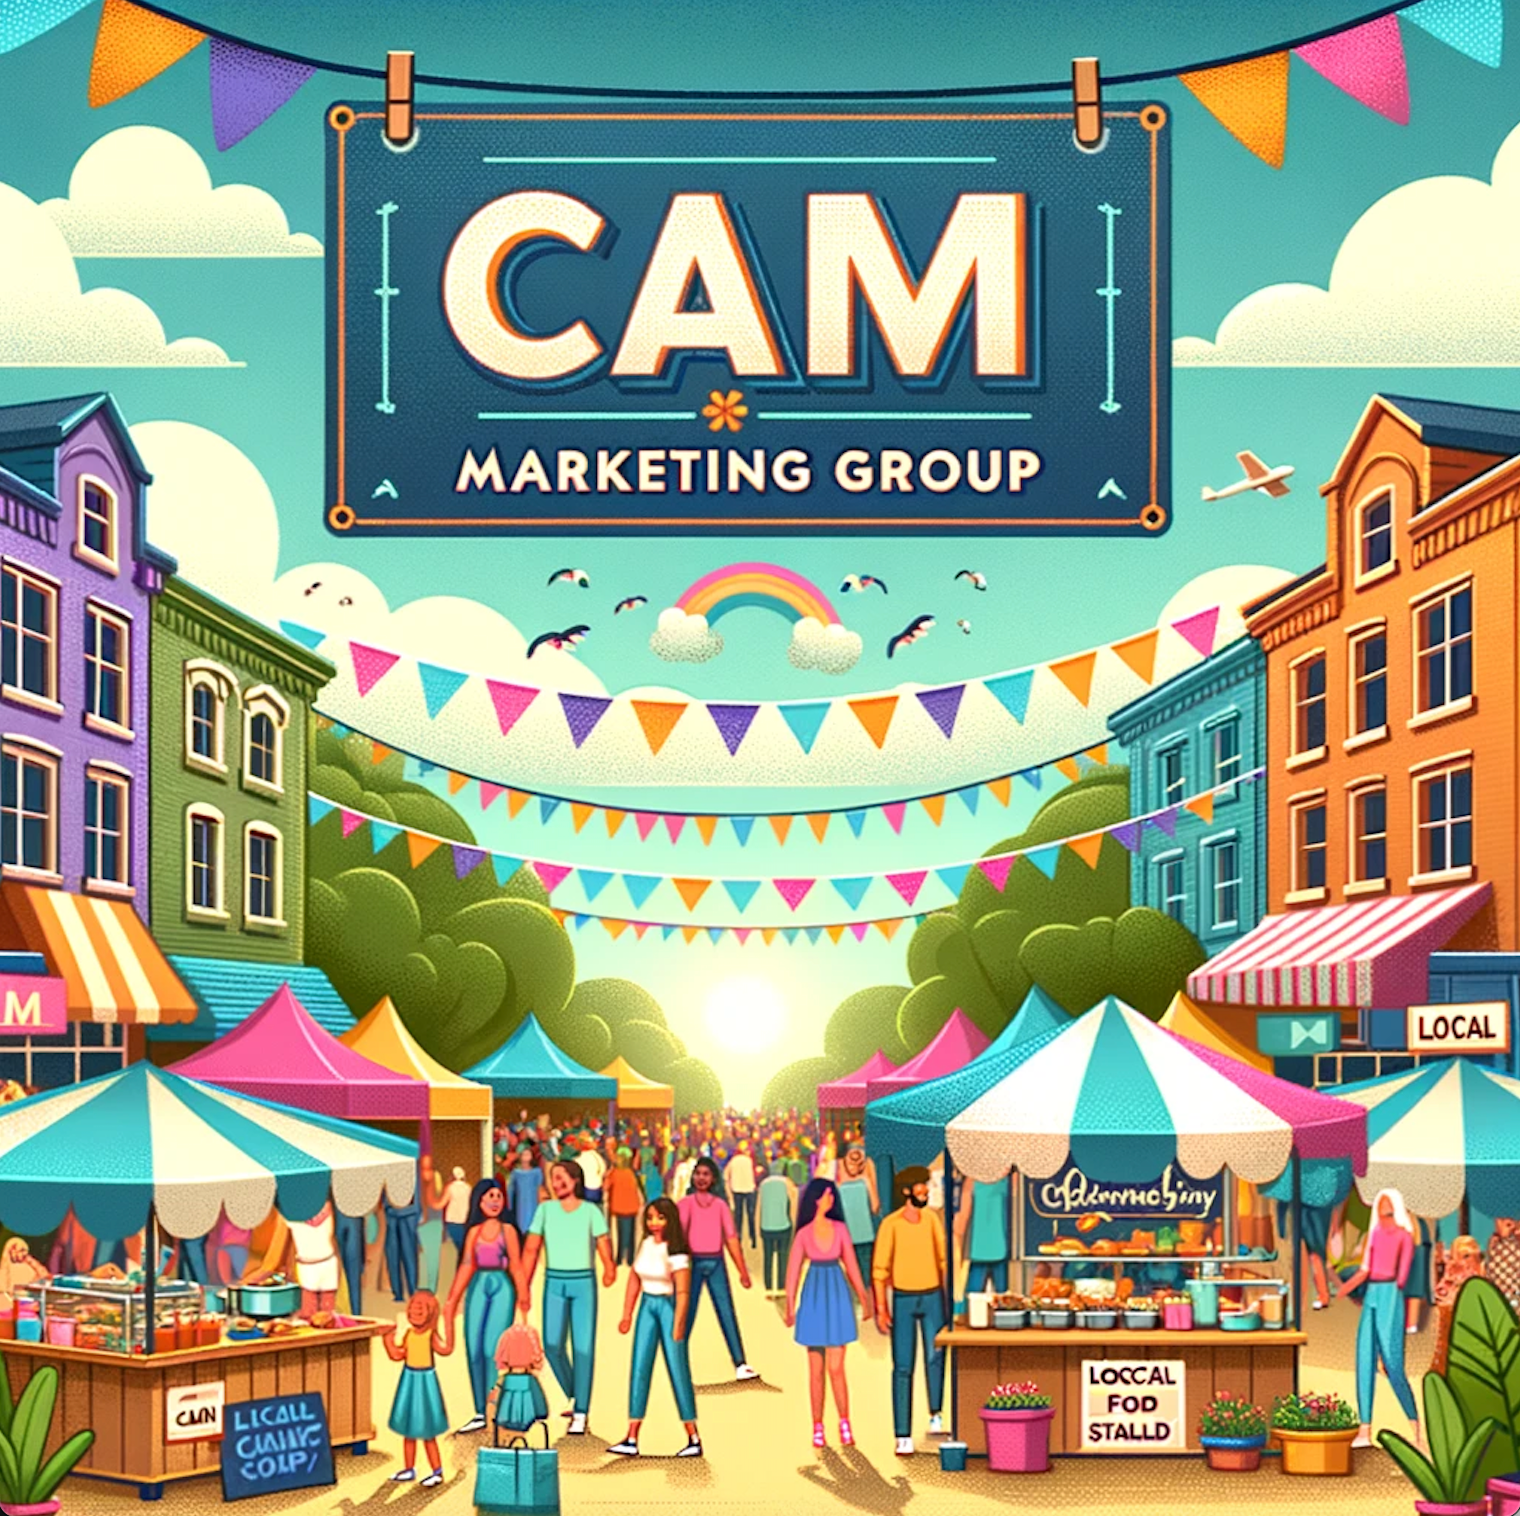 A colorful illustration of a market with a sign that says cam marketing group.